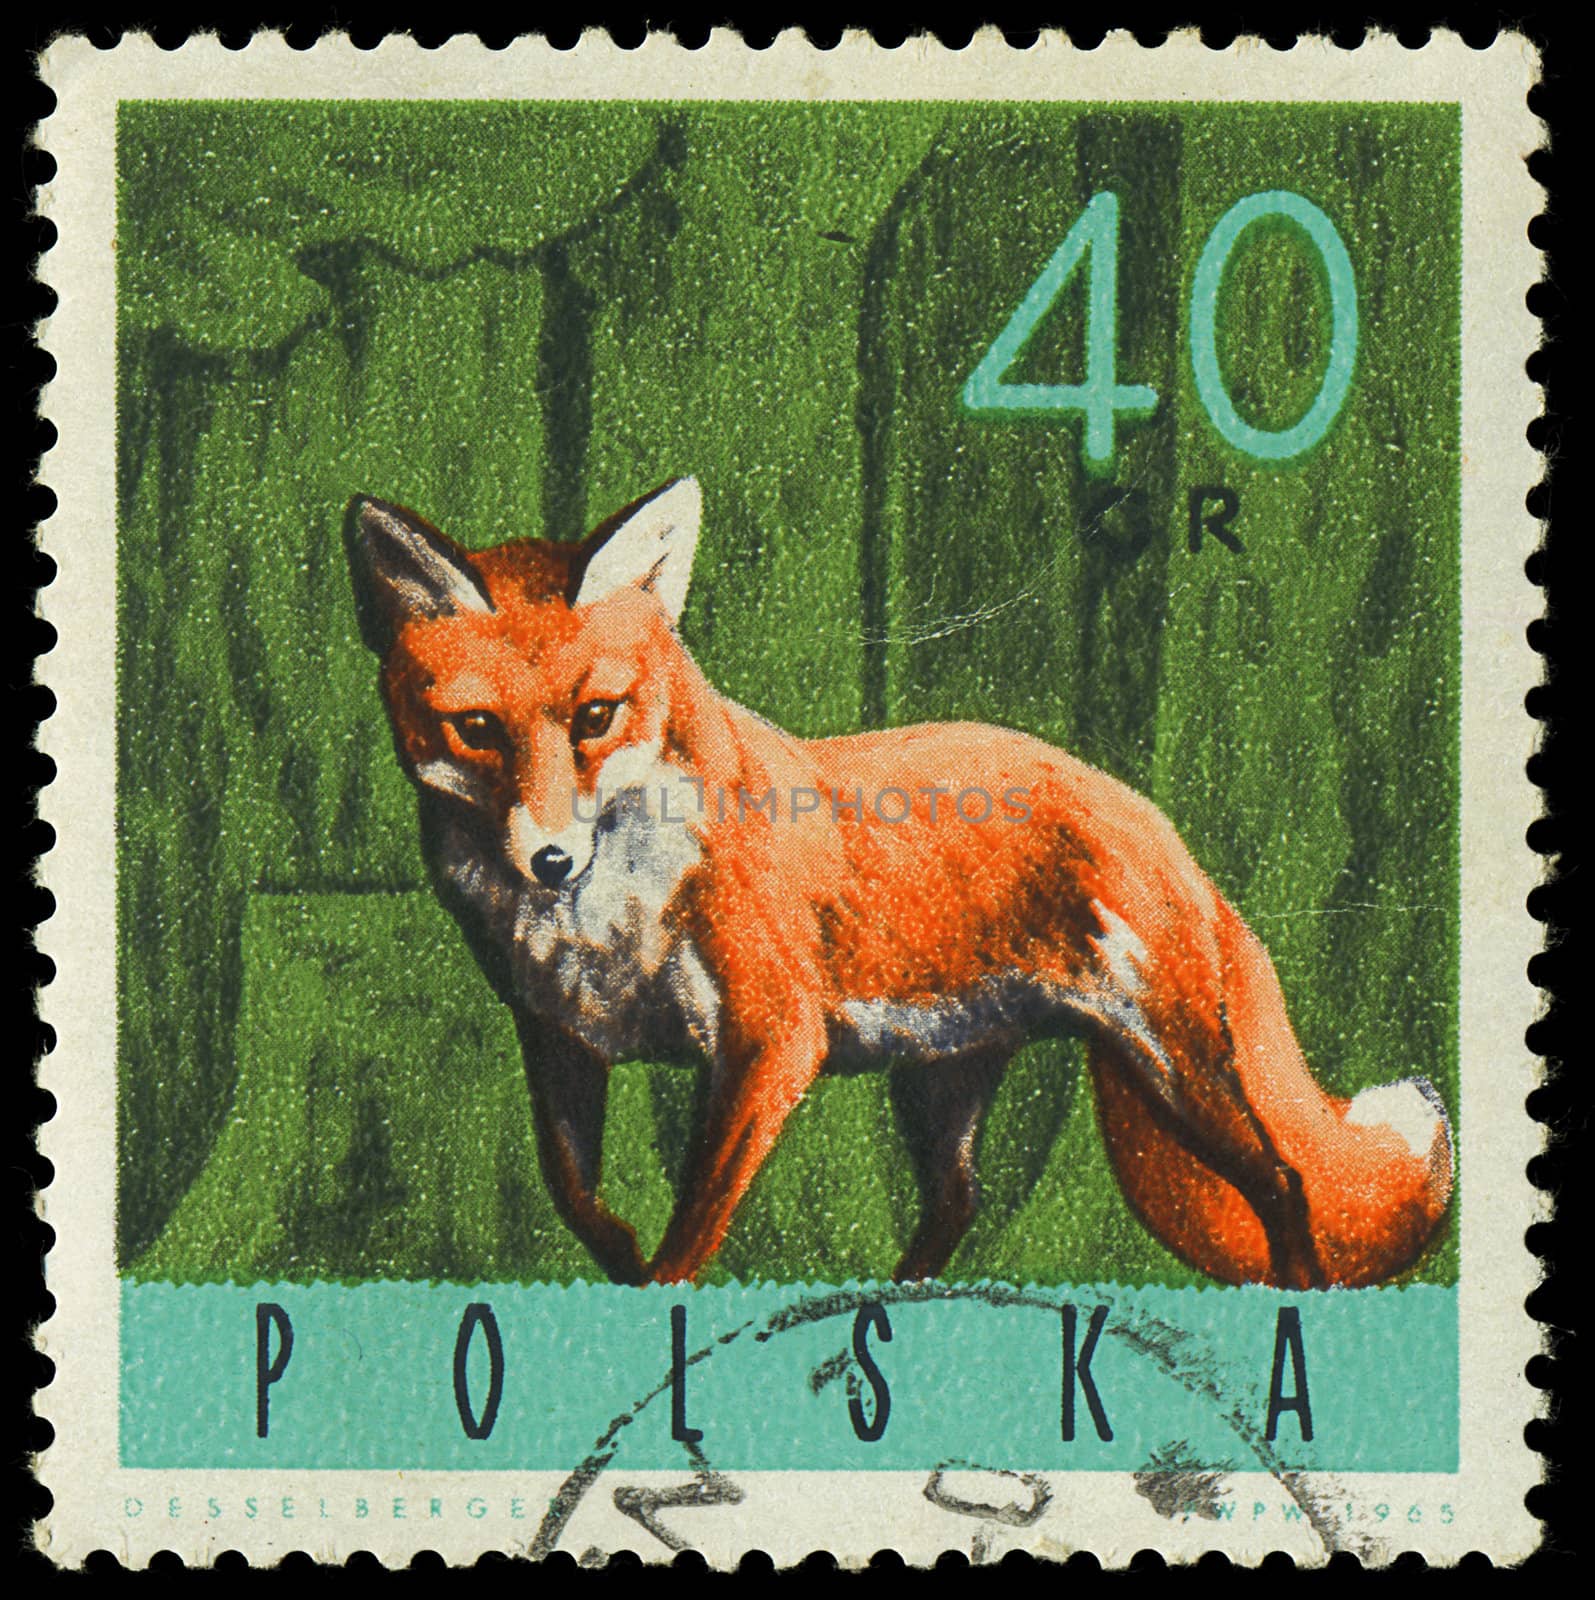 POLAND - CIRCA 1965: a stamp printed in the Poland shows Red Fox by Zhukow